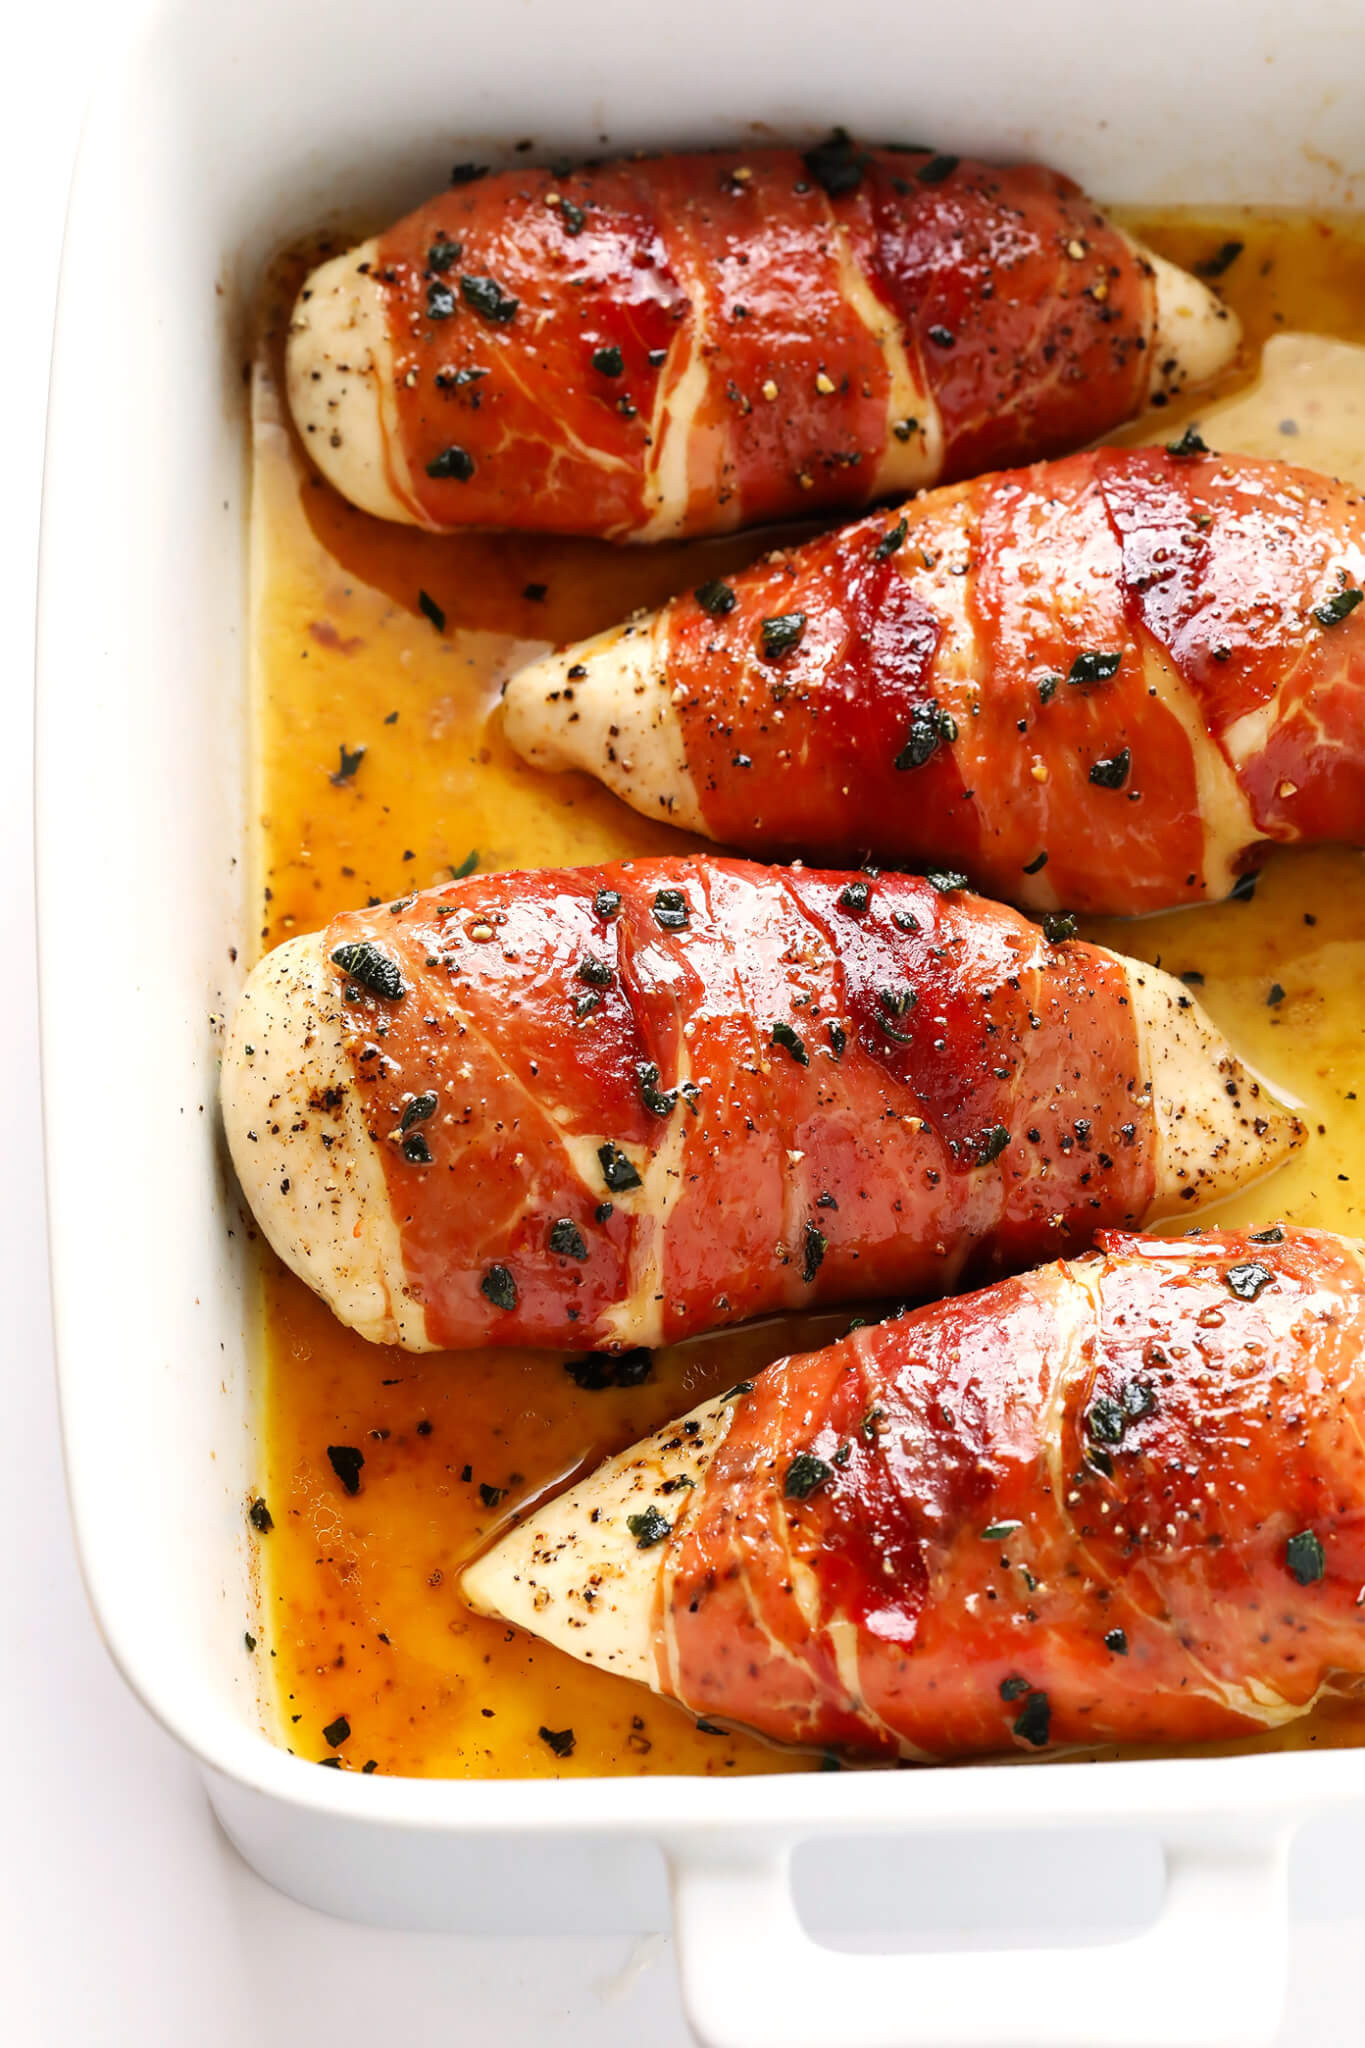 Recipe For Baked Chicken
 Prosciutto Wrapped Baked Chicken